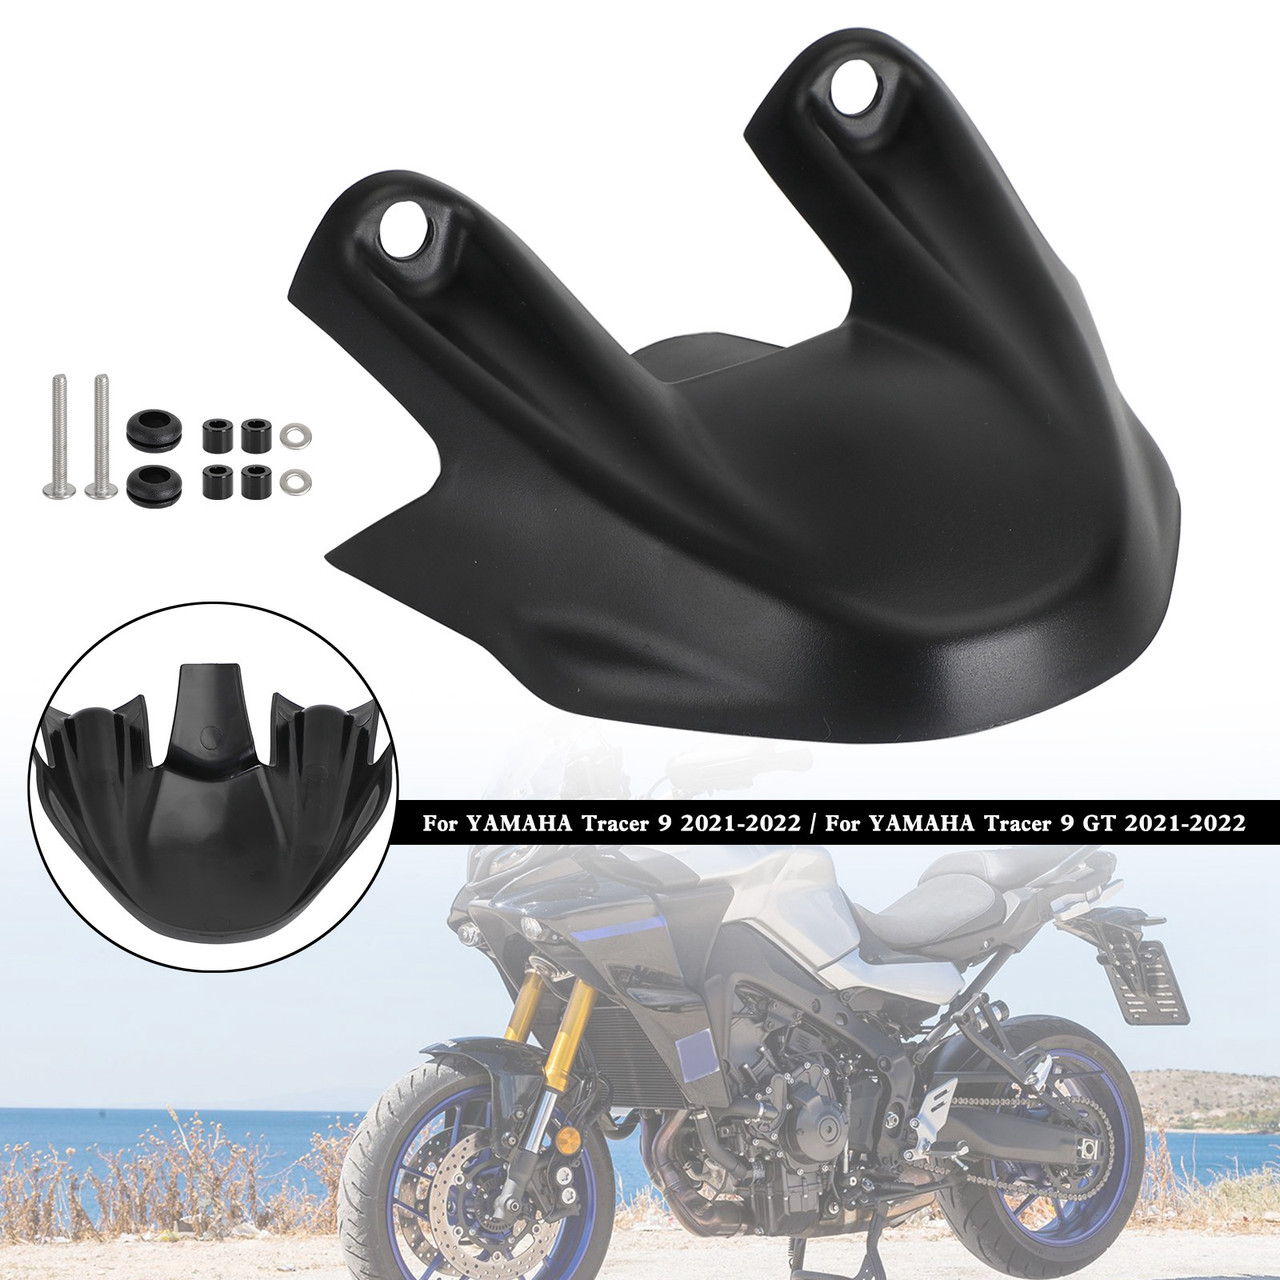 Front Wheel Beak Nose Cone Extension For YAMAHA Tracer 9 GT 2021-2022